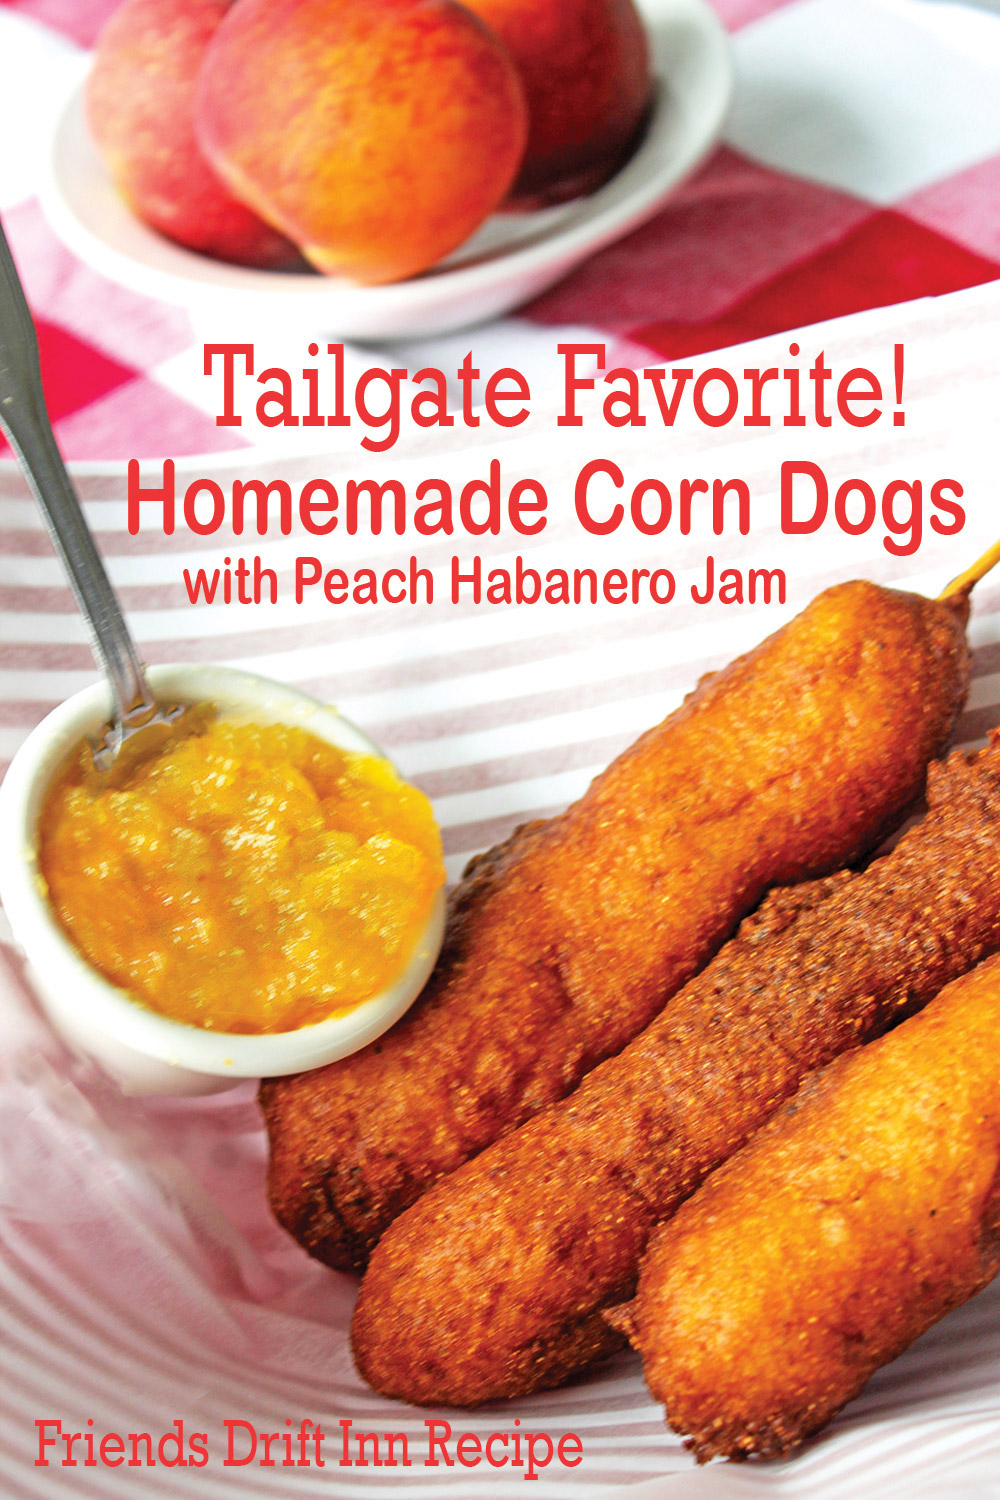 Homemade corn dogs shown with peach habanero jam dipping bowl in a diner serving basket